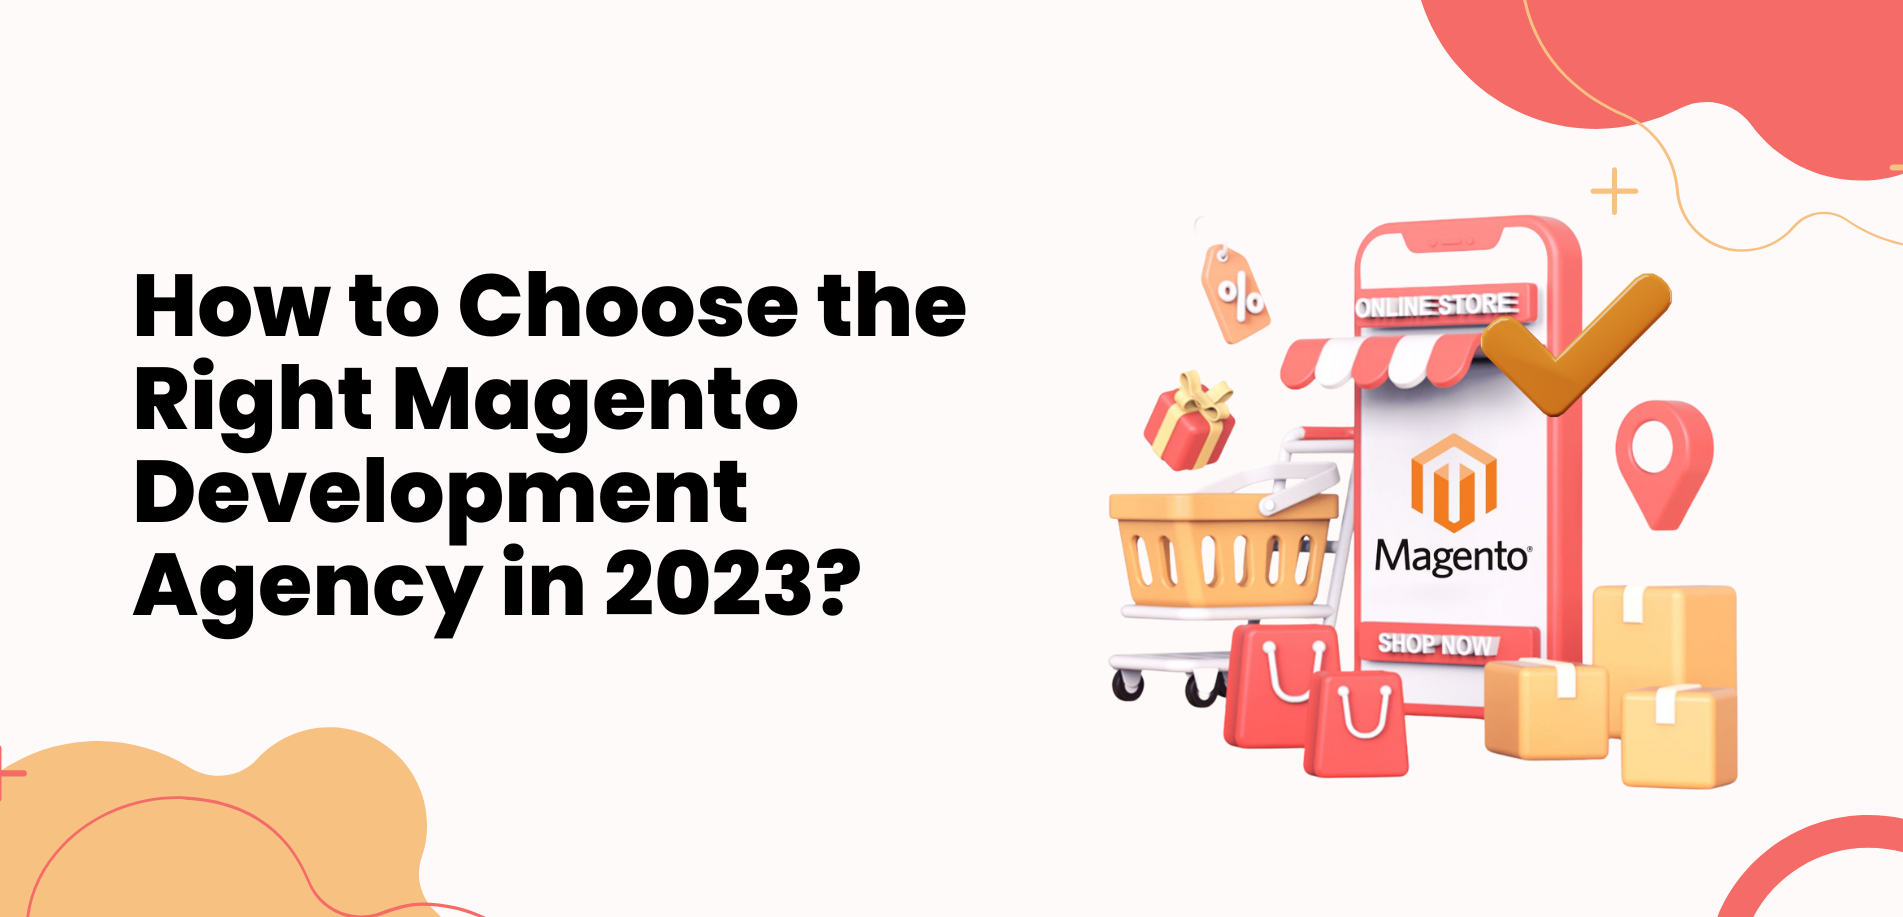 How to choose right magento development agency